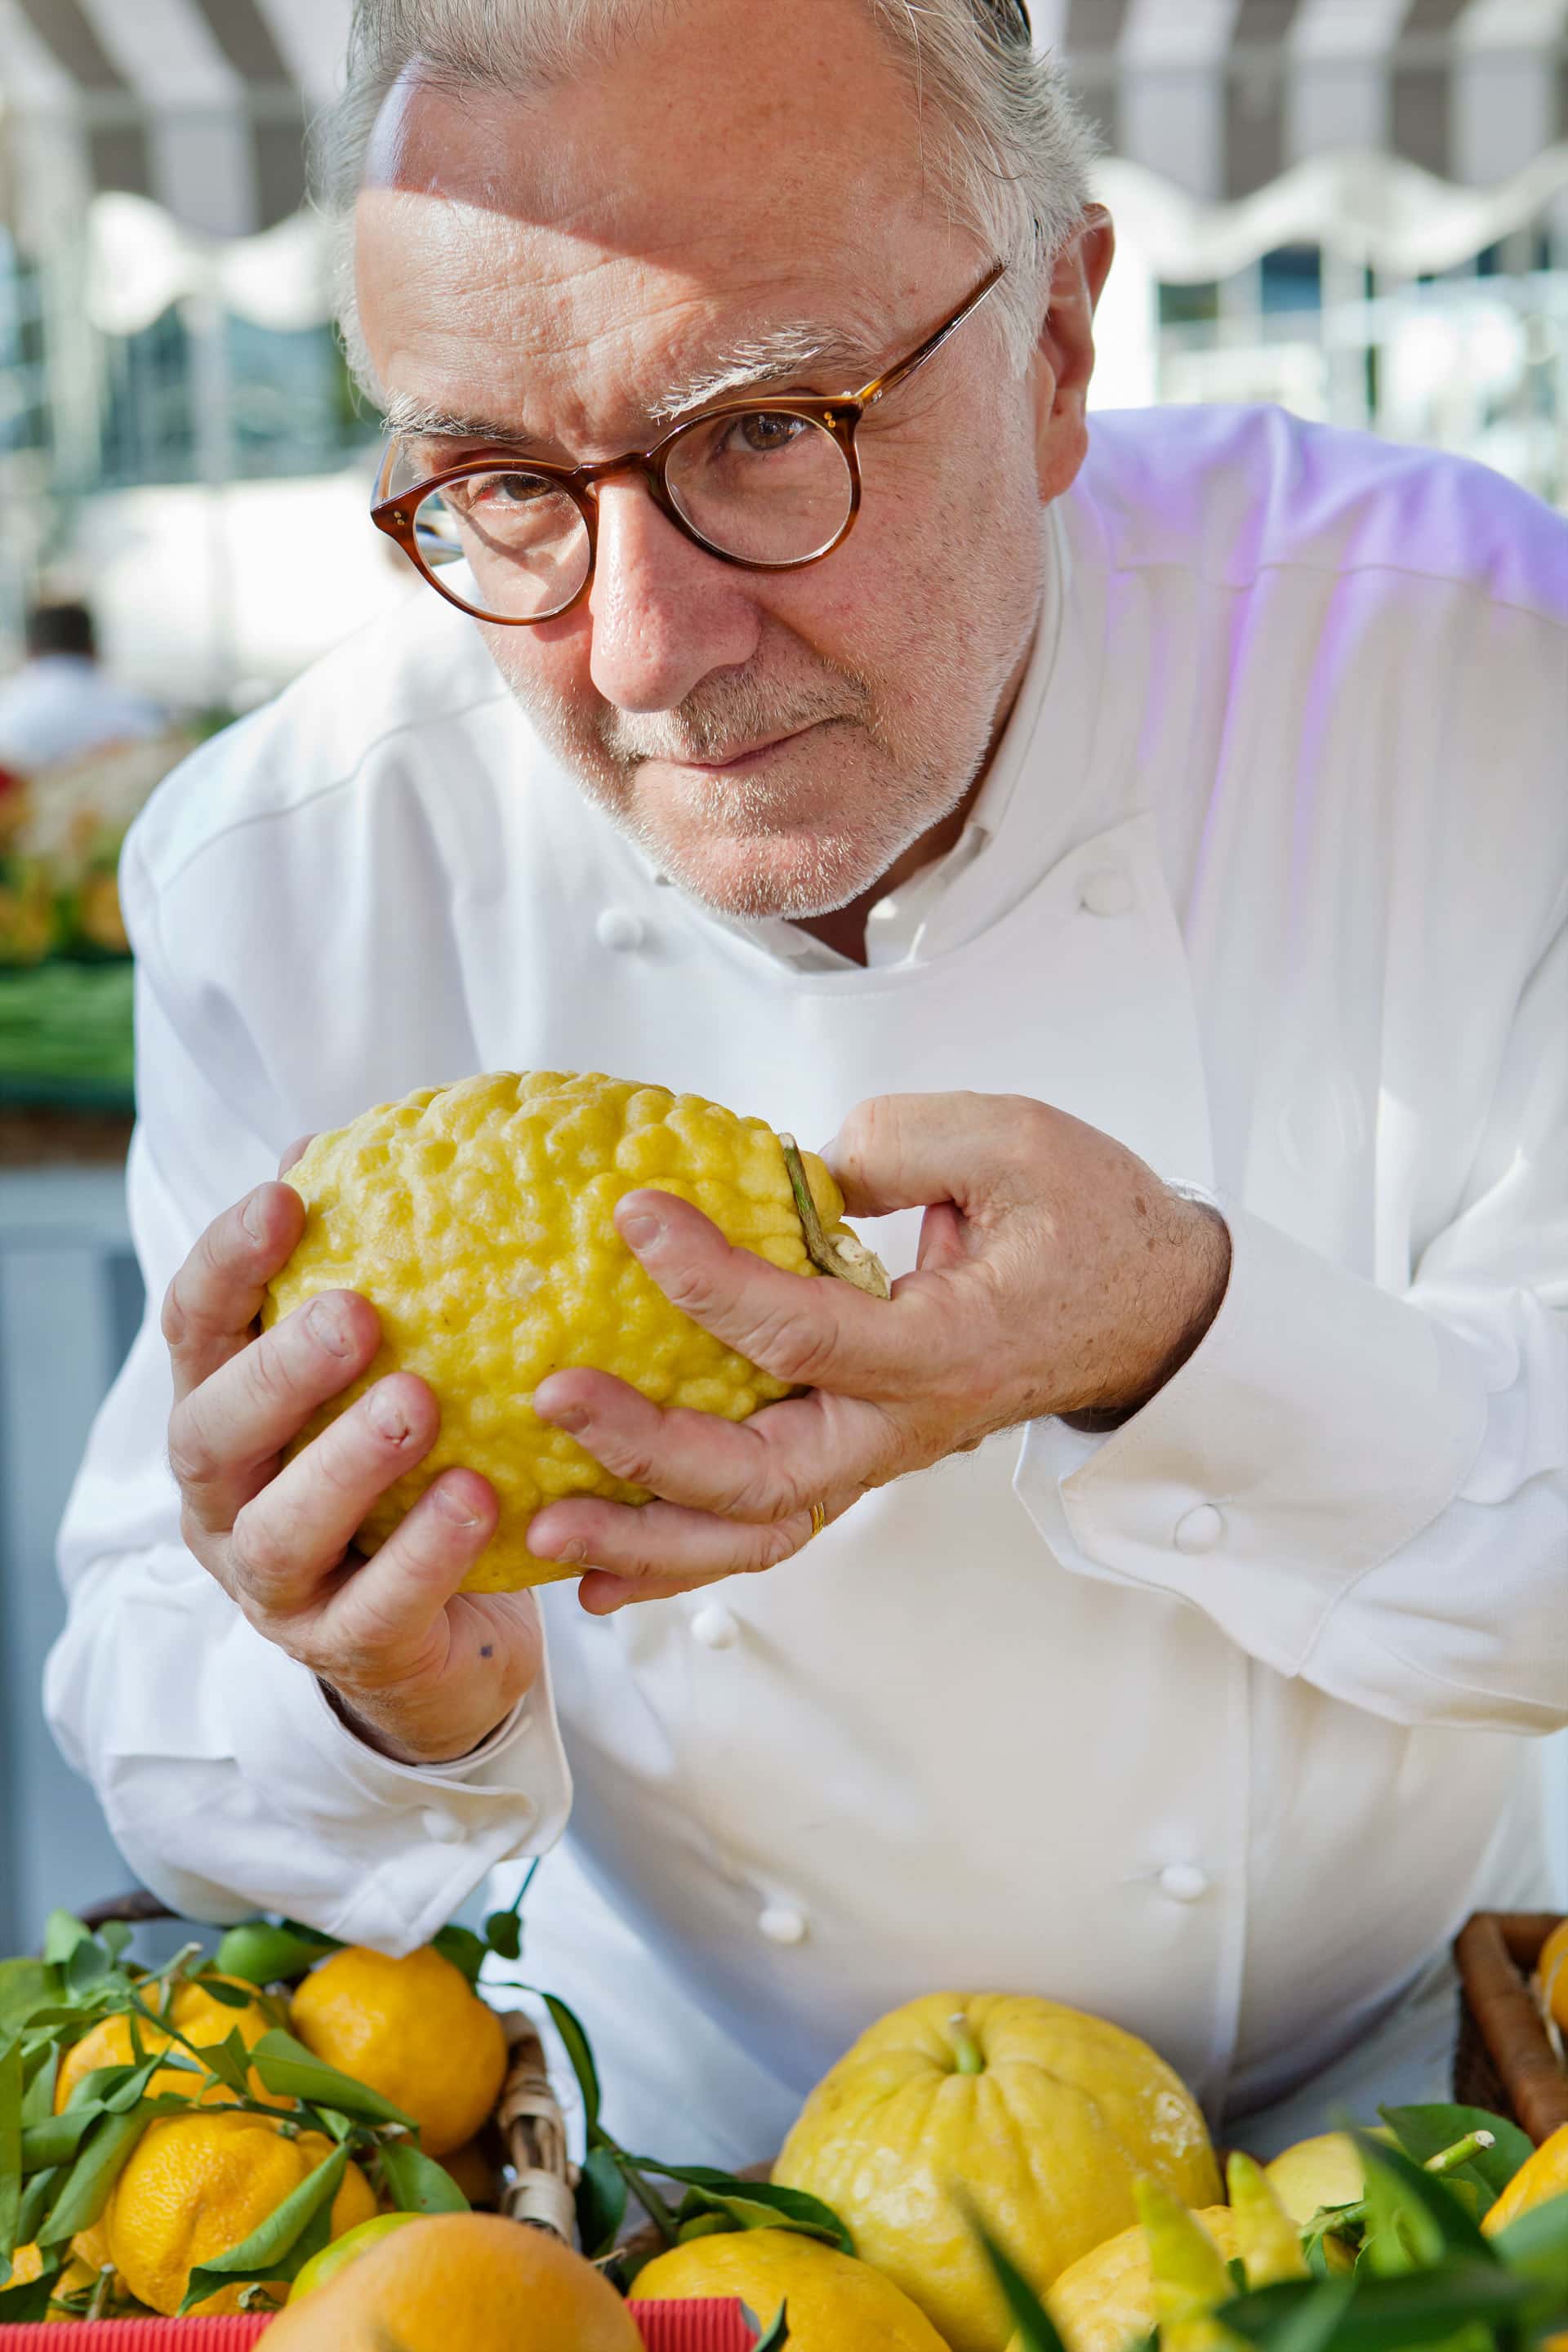 Close-up photograph of a chef holding a large yellow citrus fruit over a market stall display of lemons